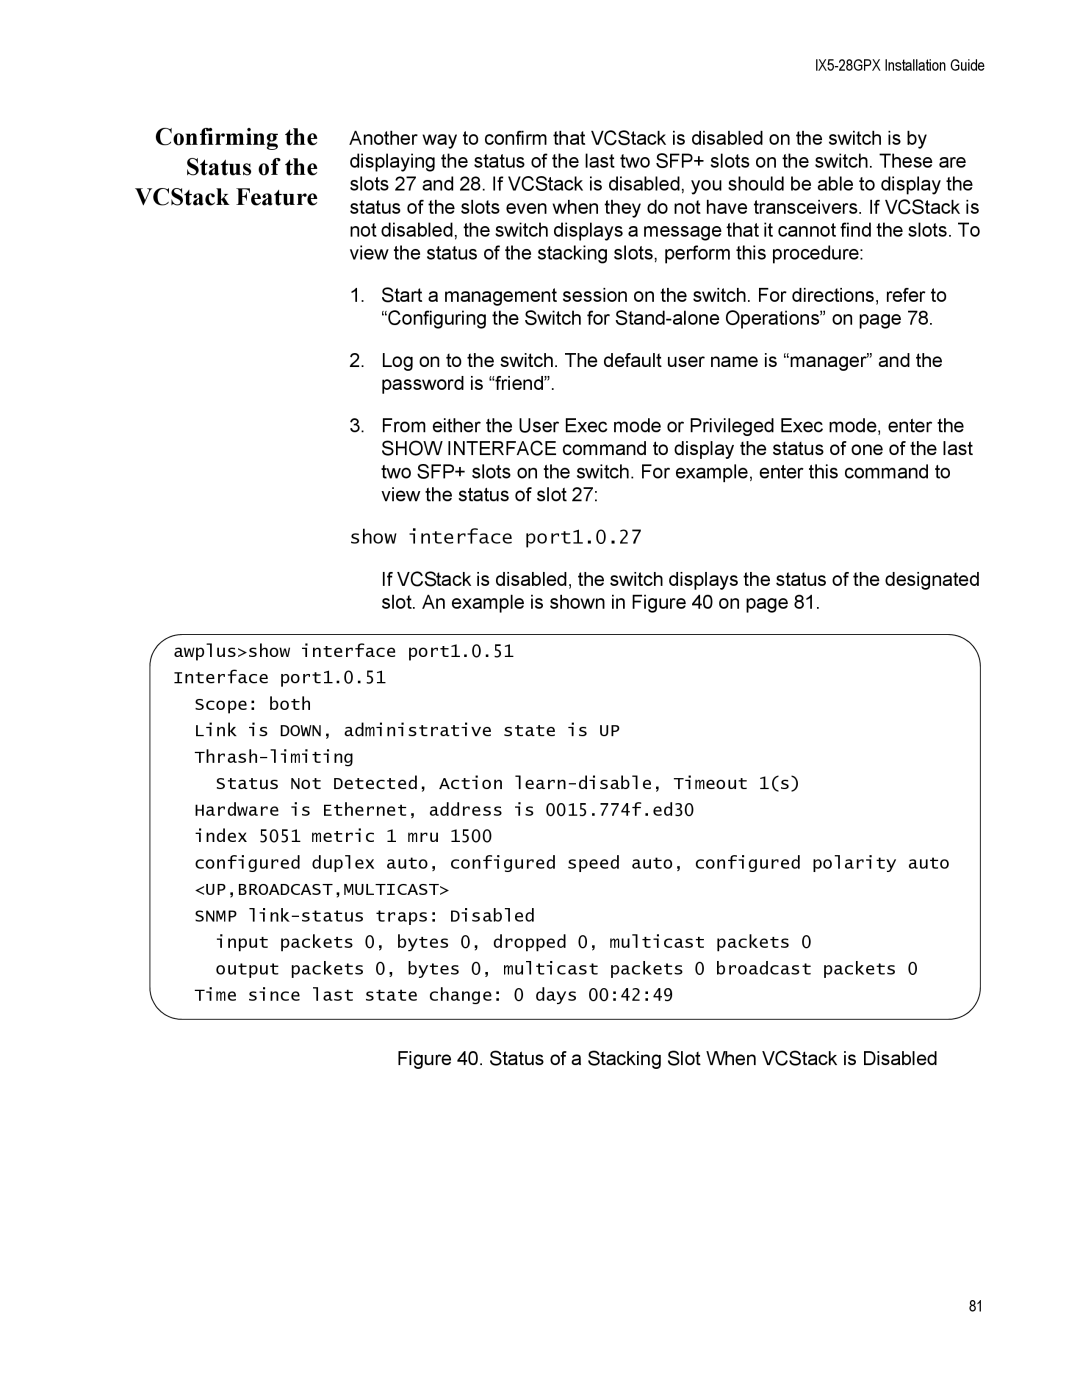 Allied Telesis AT-IX5-28GPX manual Confirming the Status of the VCStack Feature 